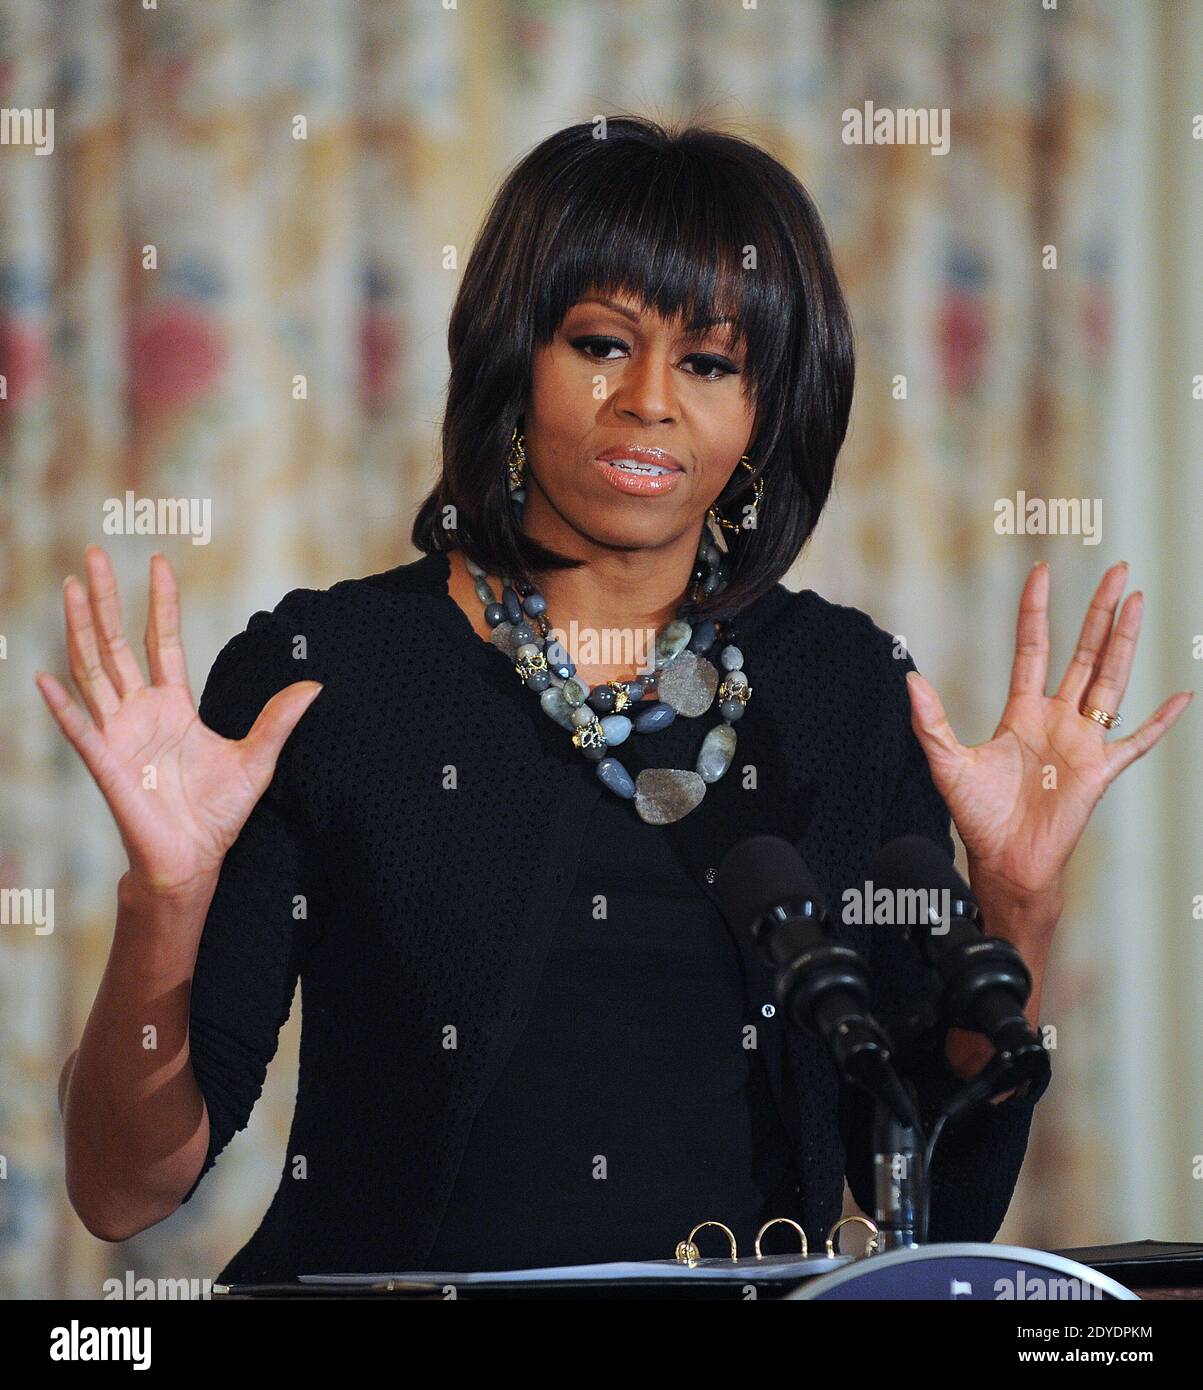 US first lady Michelle Obama speaks during an interactive student workshop with the cast and crew of the film 'Beasts of the Southern Wild' at the State Dining Room of the White House in Washington, DC., USA on February 13, 2013. Photo by Olivier Douliery/ABACAPRESS.COM Stock Photo